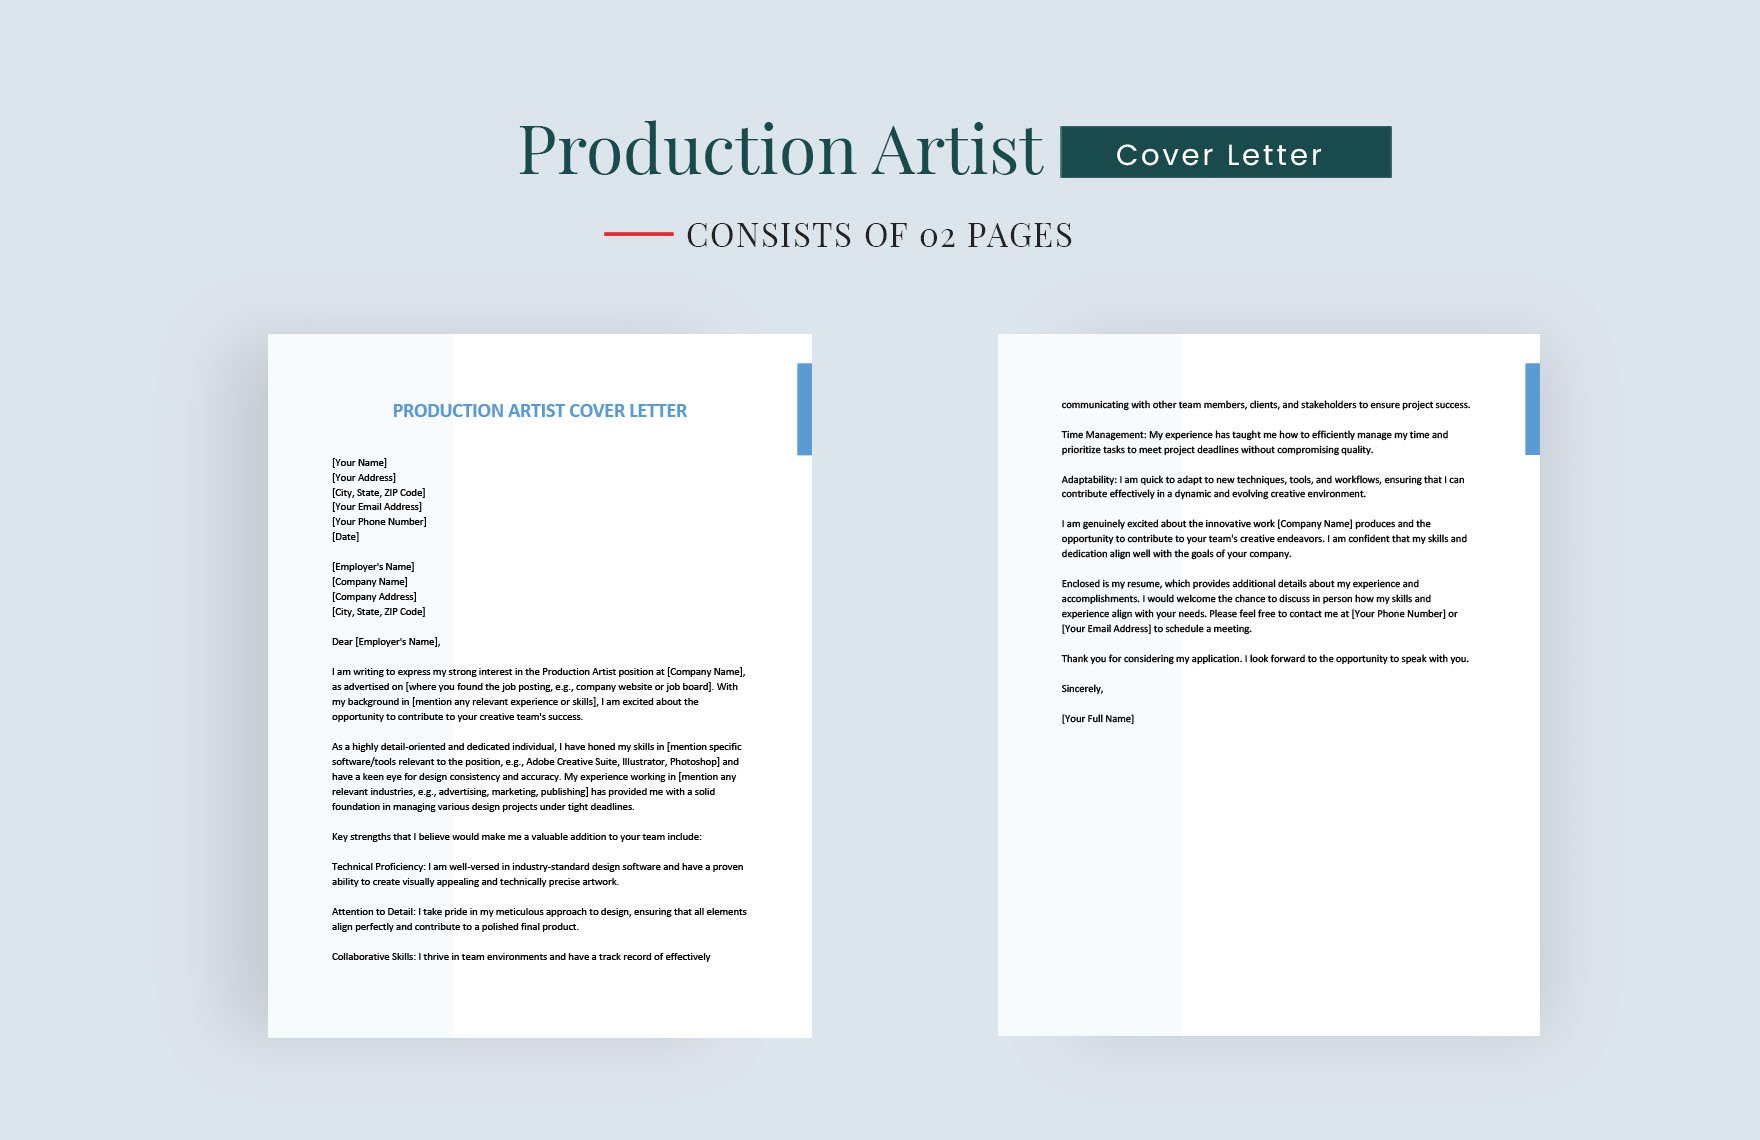 Production Artist Cover Letter in Word, Google Docs